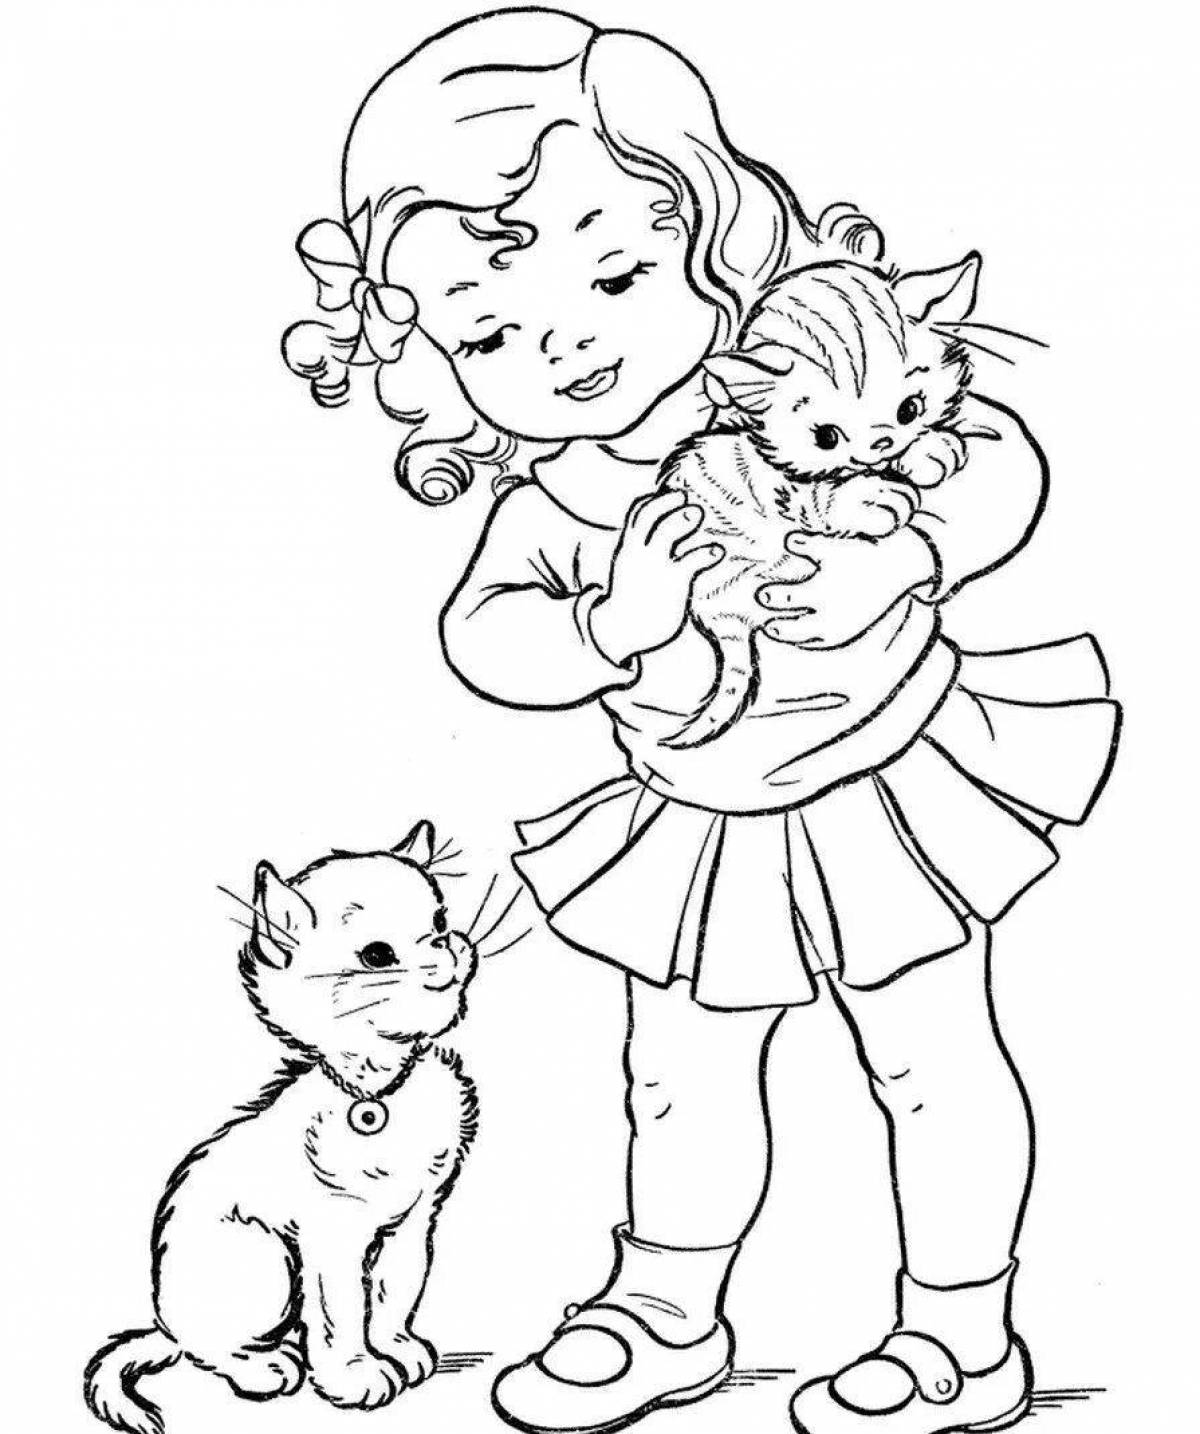 Amazing animal coloring pages for girls